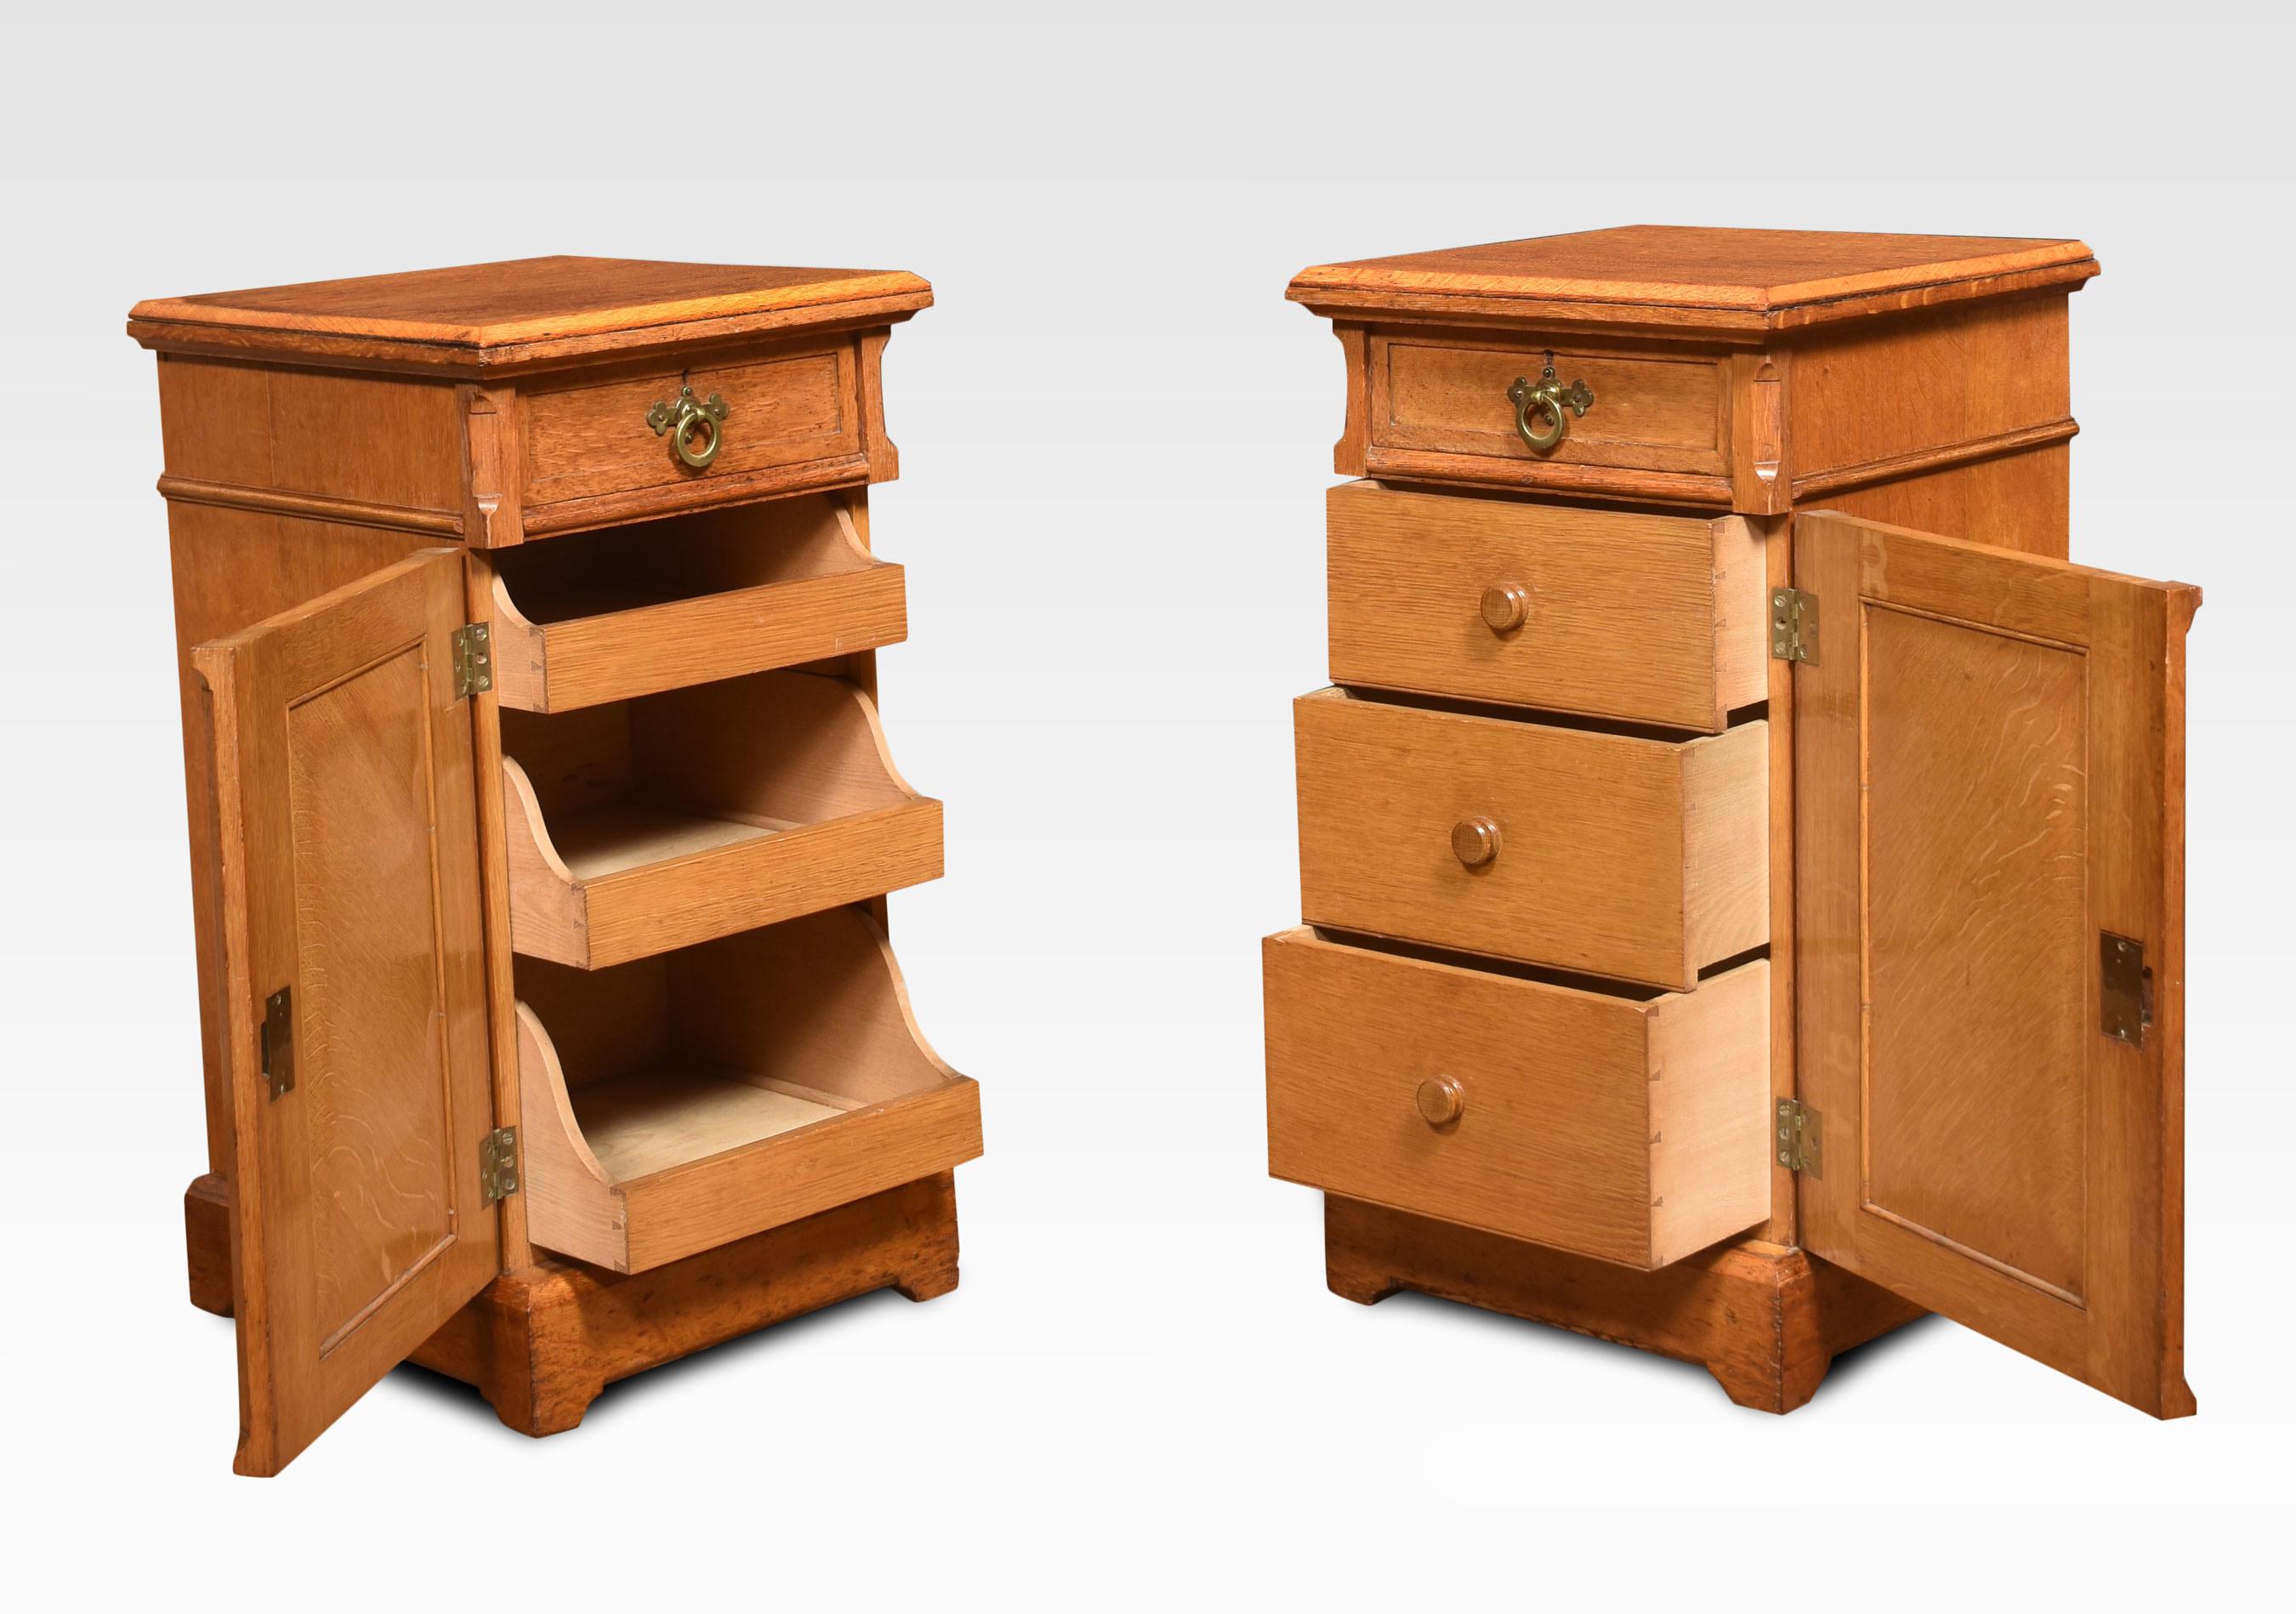 British Pair of Gothic Revival Bedside Cabinets For Sale